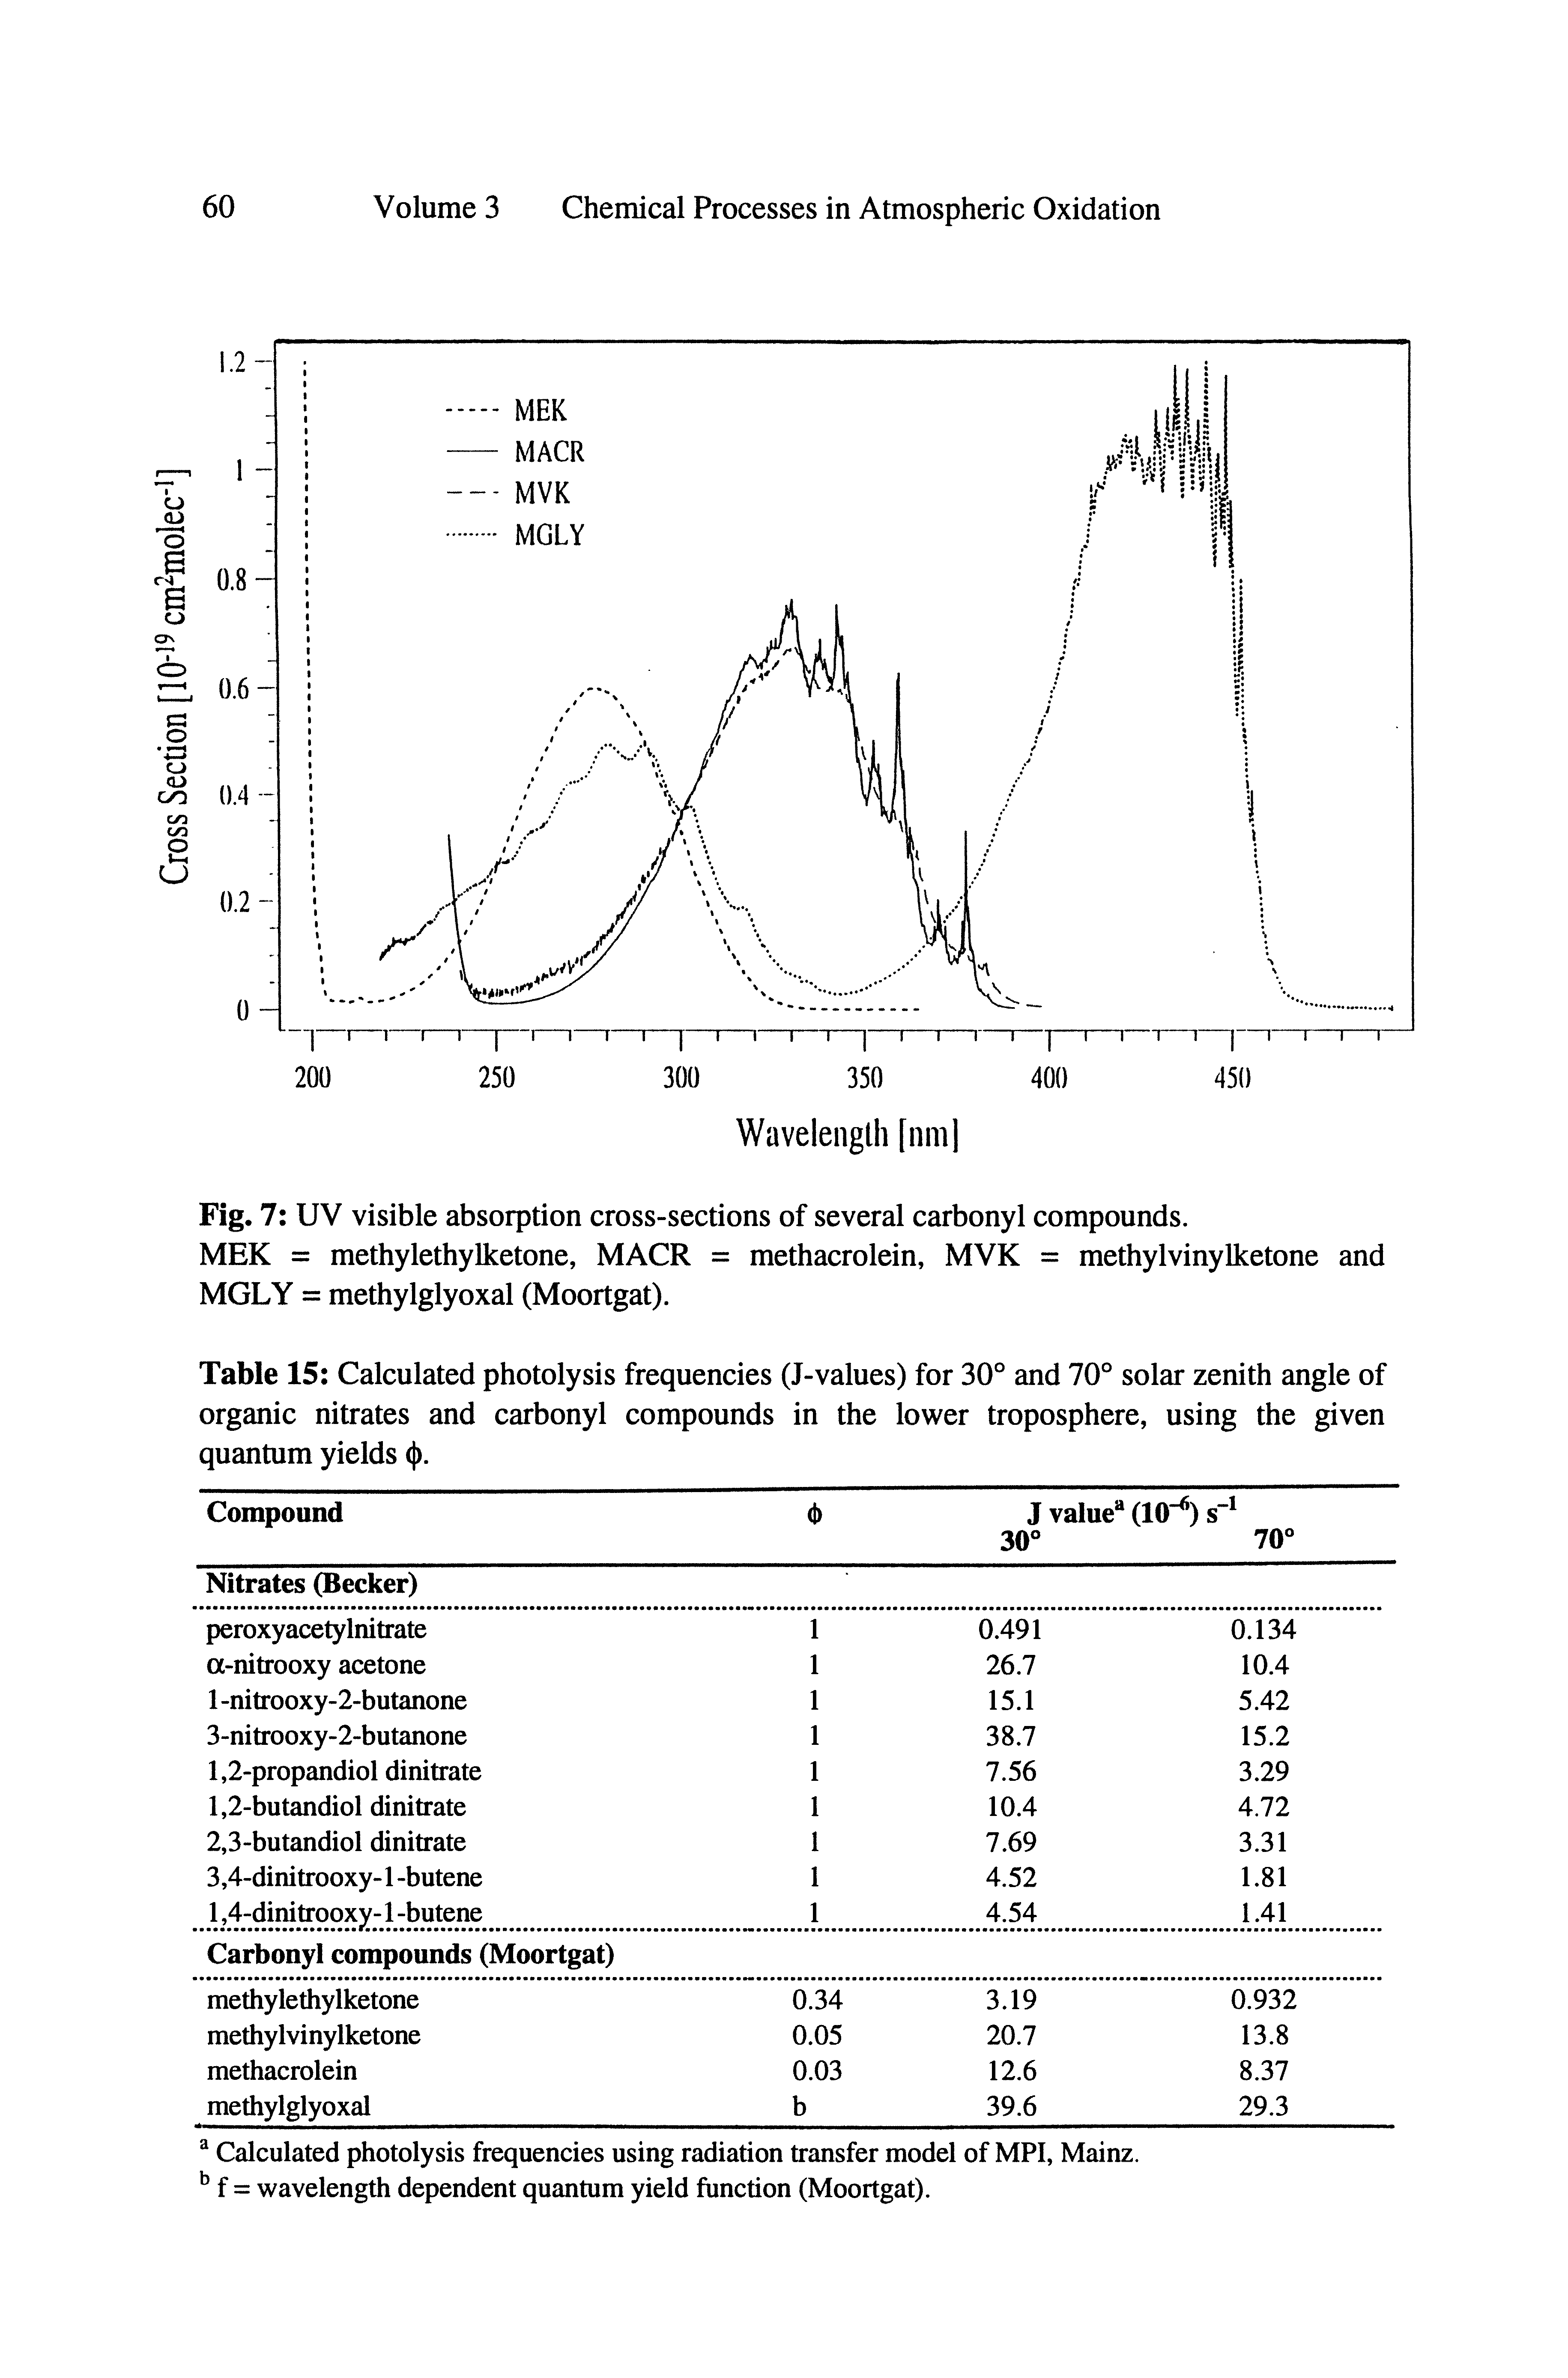 Fig. 7 UV visible absorption cross-sections of several carbonyl compounds.